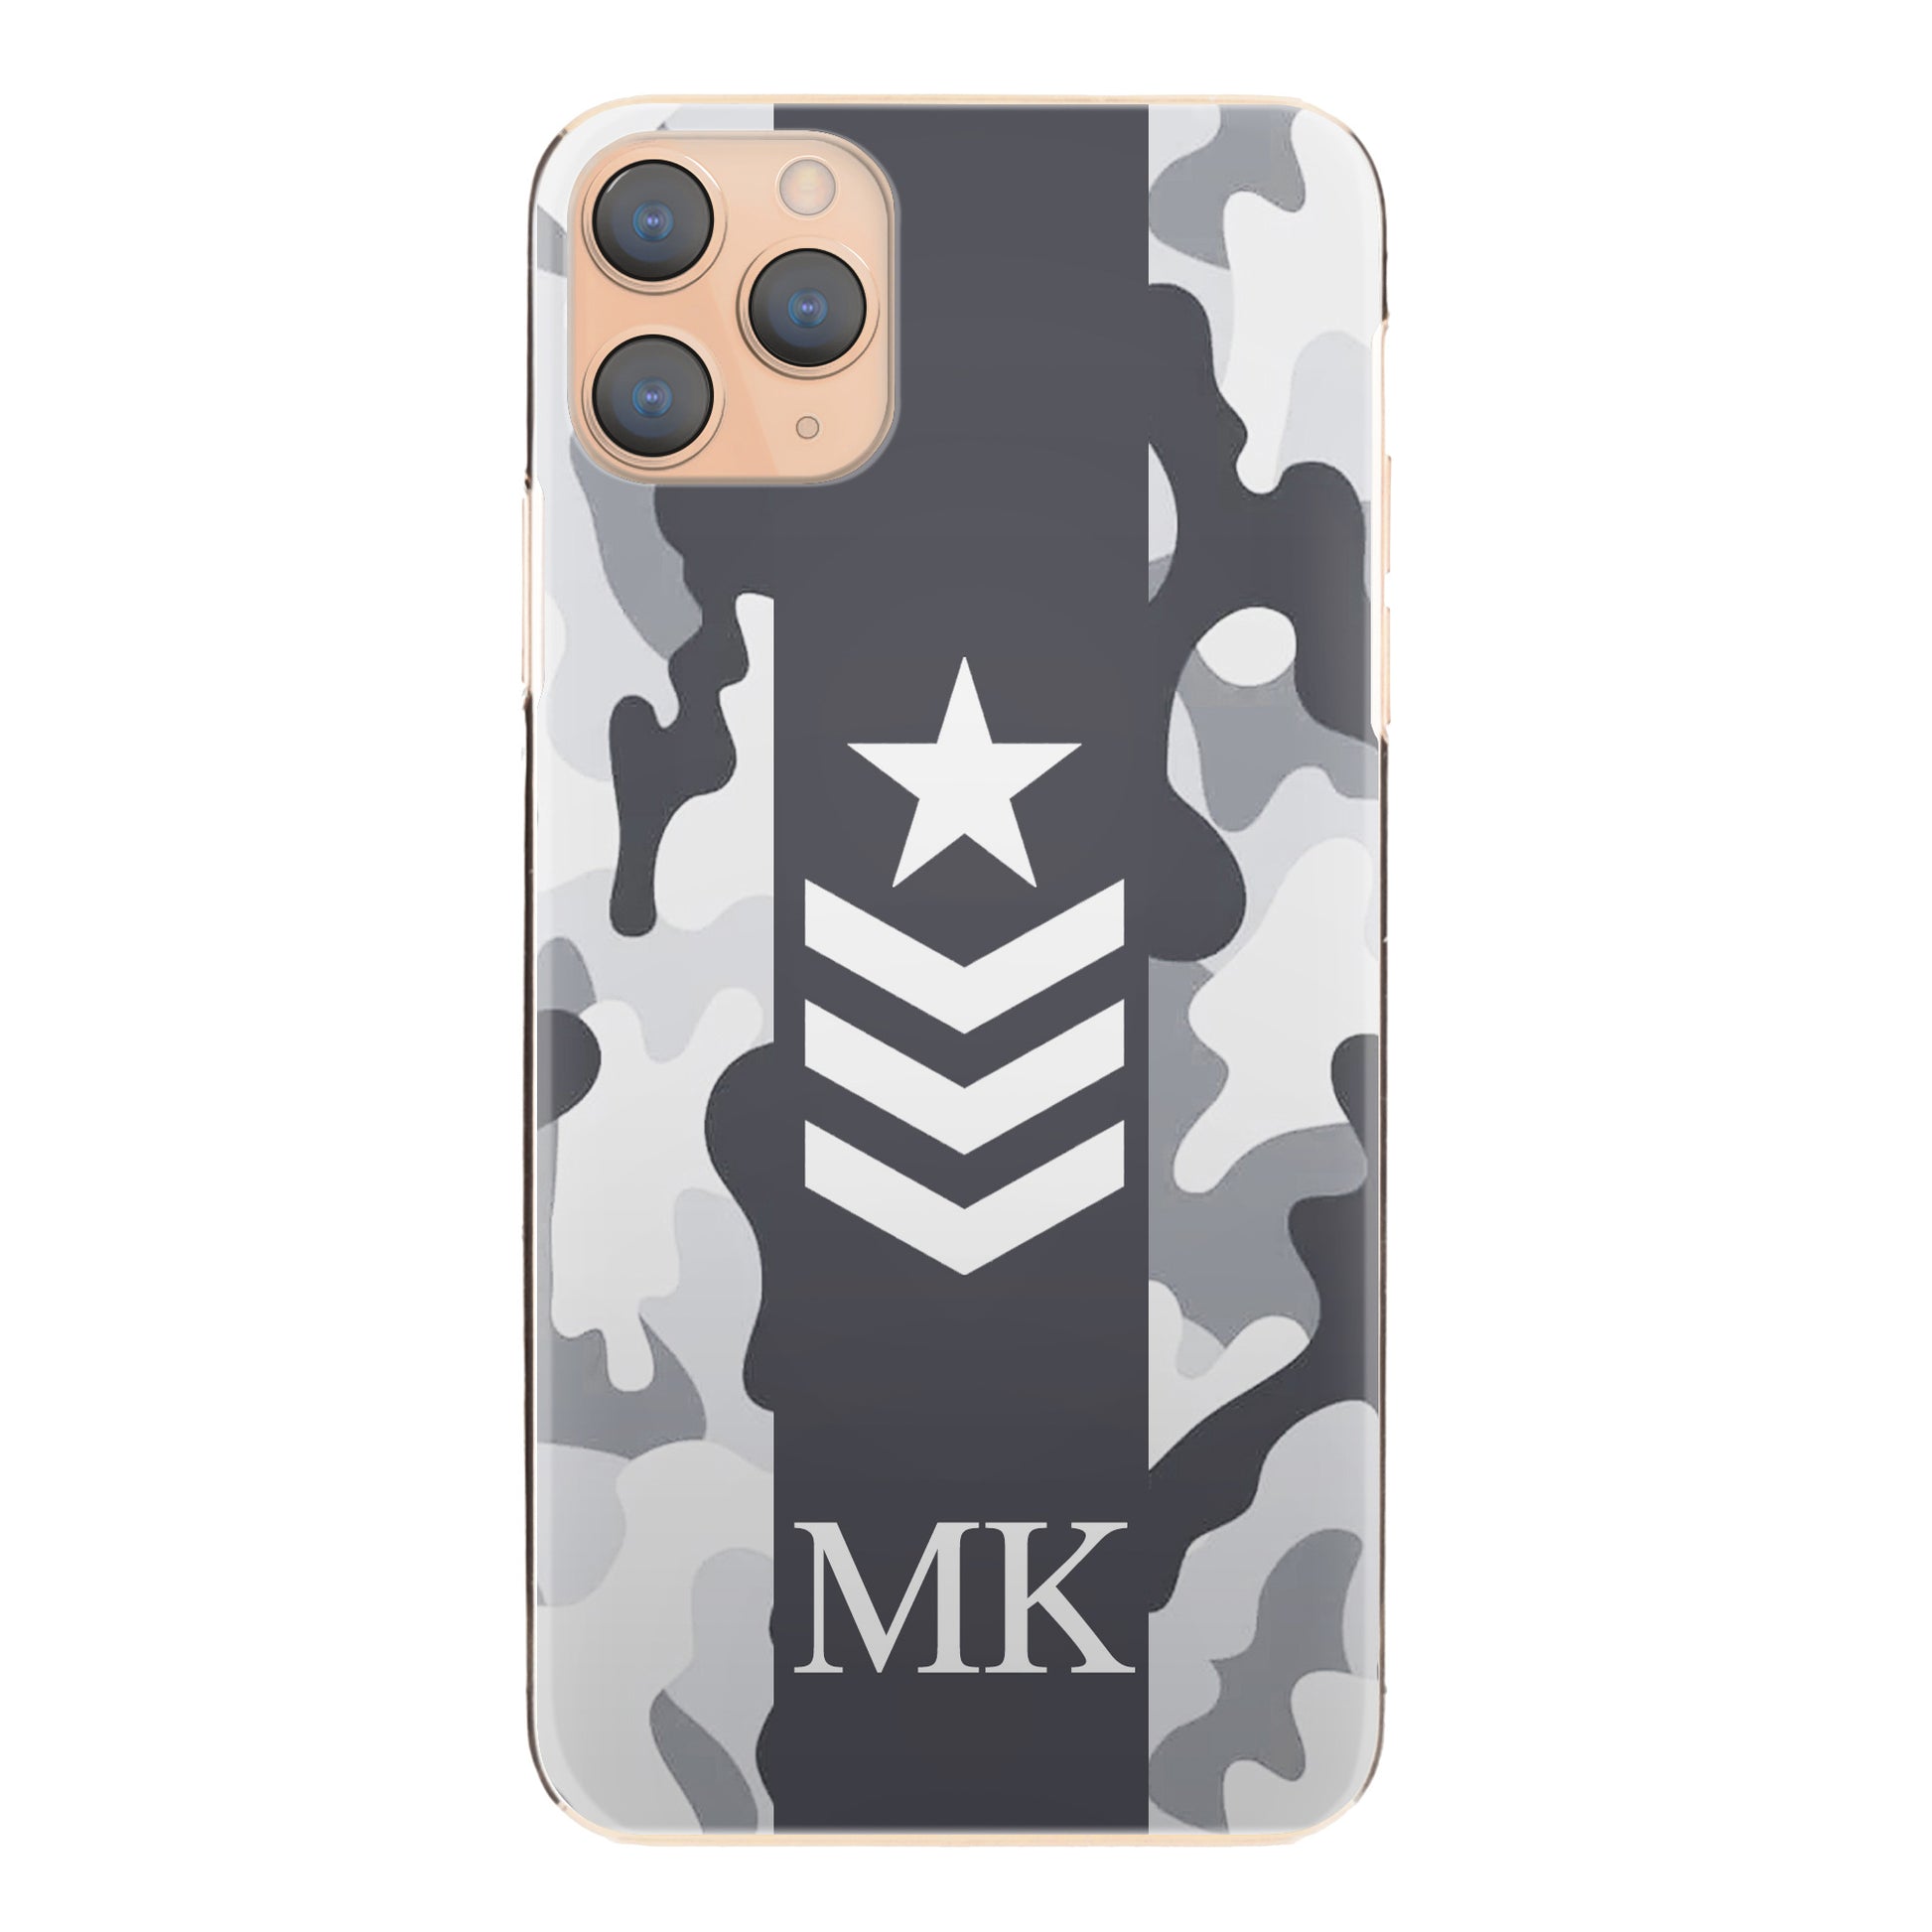 Personalised HTC Phone Hard Case with Initials and Army Rank on Artic Camo